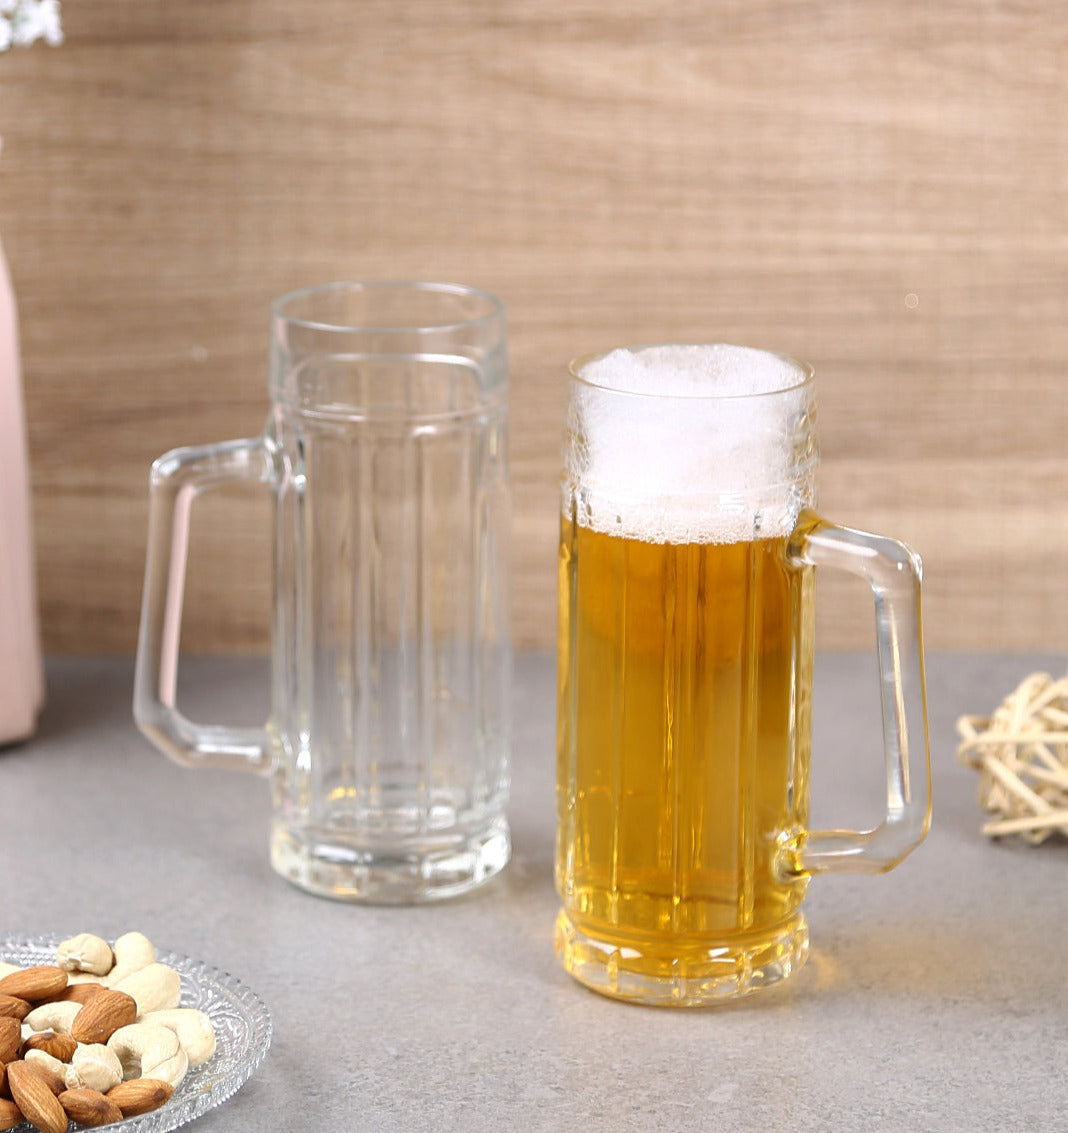 Crafted Beer Mug - Perfect for beer enthusiasts seeking quality beer mugs.